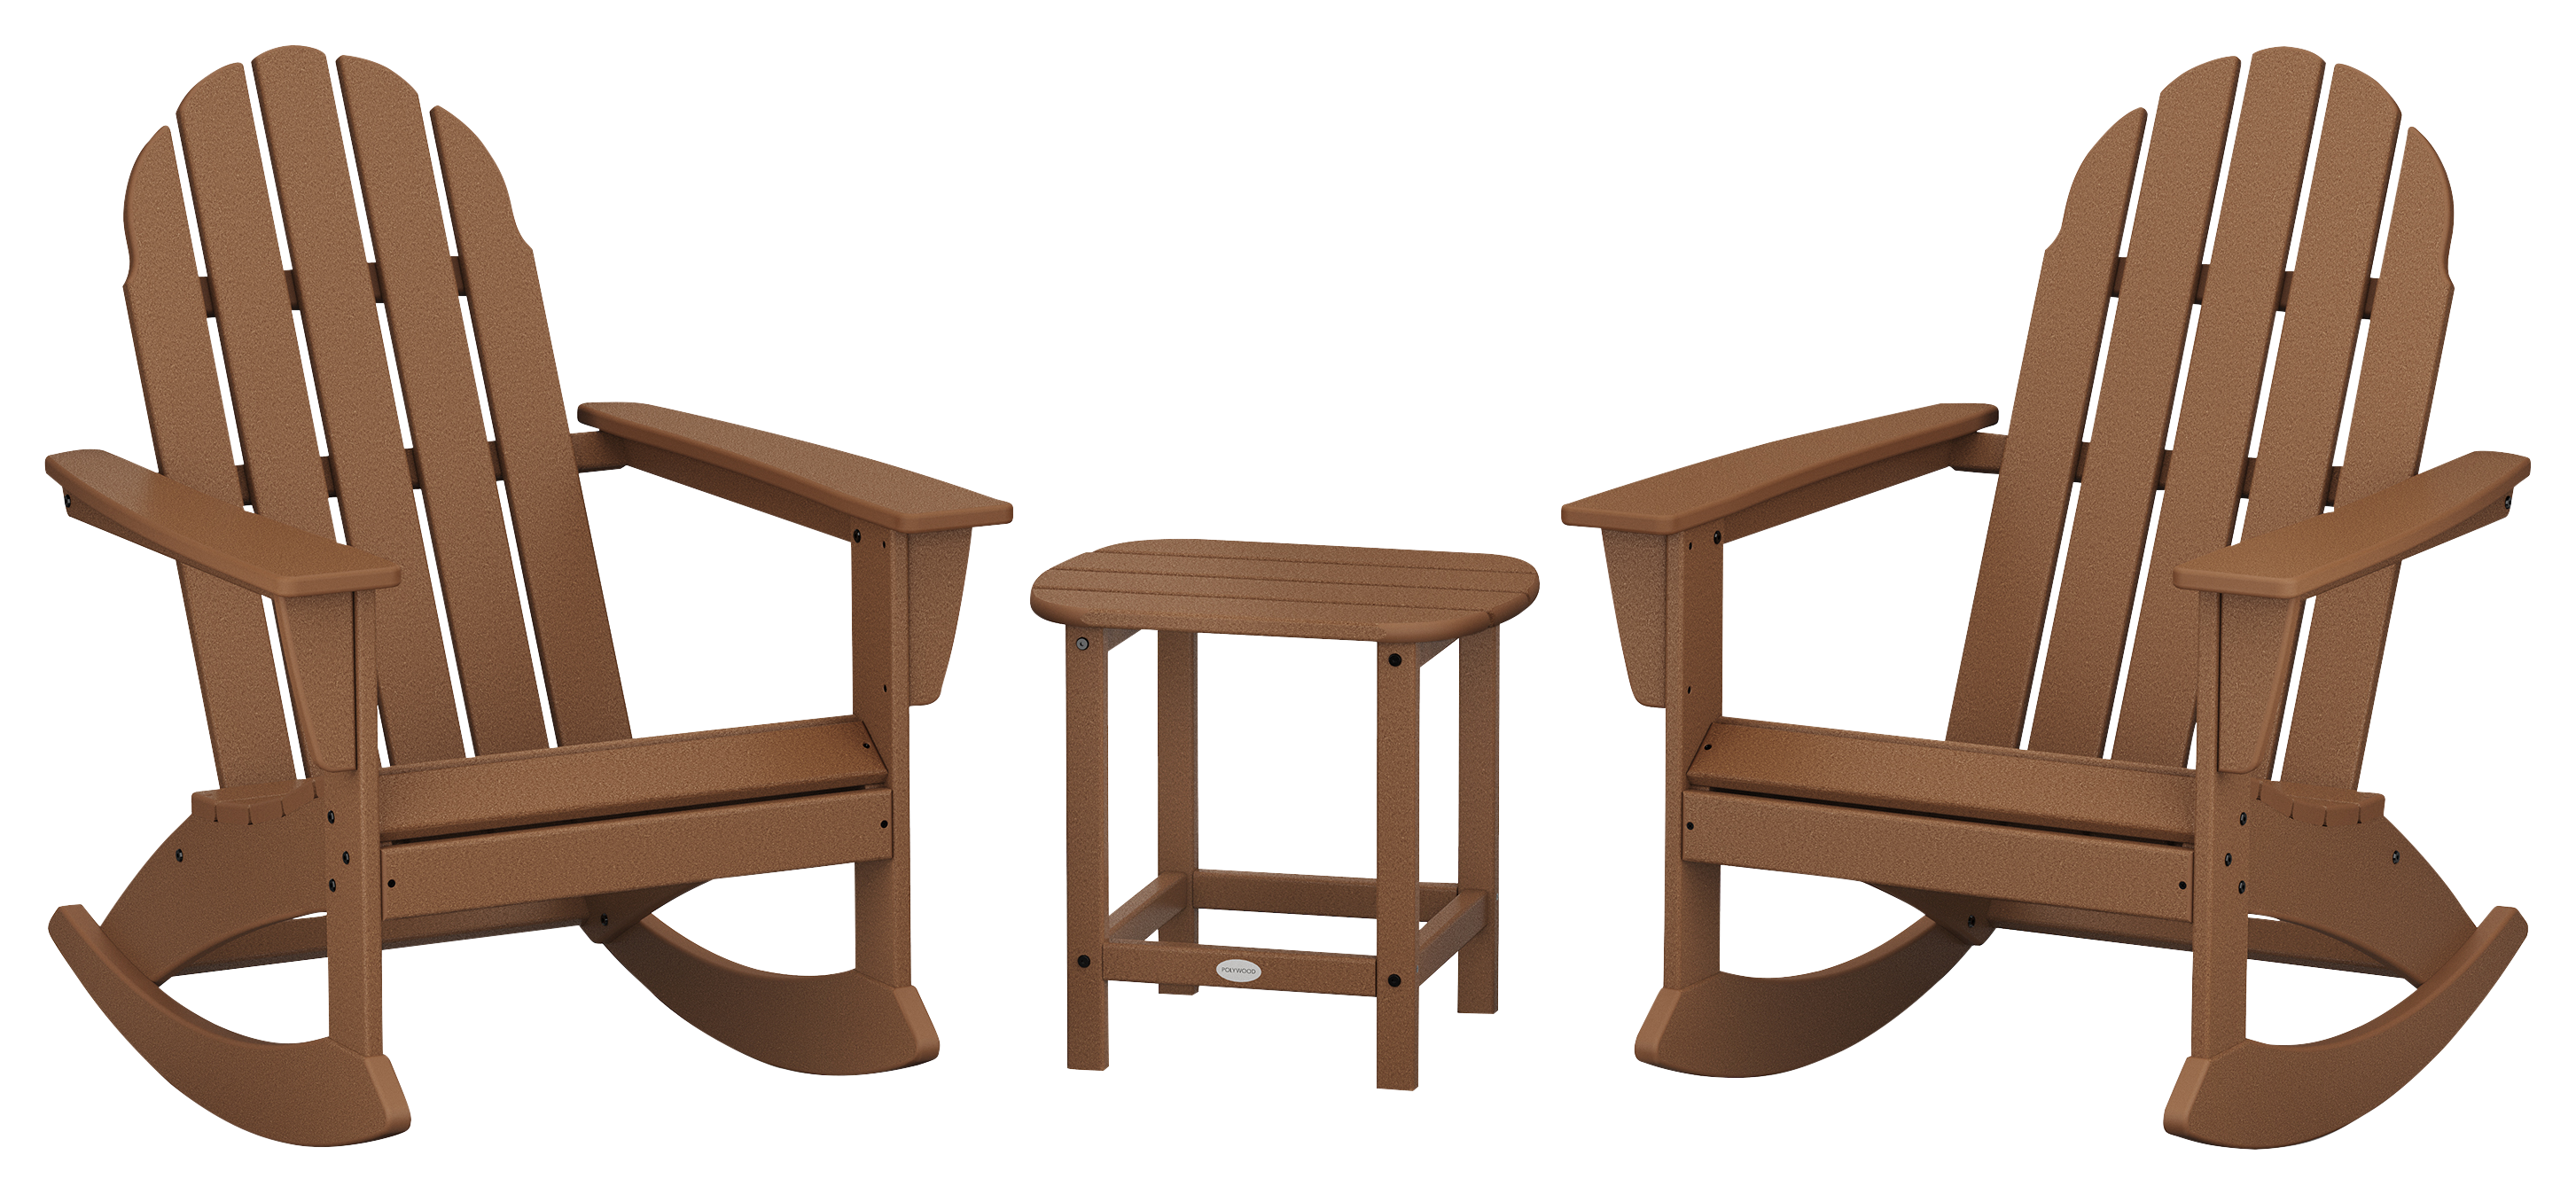 POLYWOOD Vineyard 3-Piece Adirondack Rocking Chair Set with South Beach Side Table